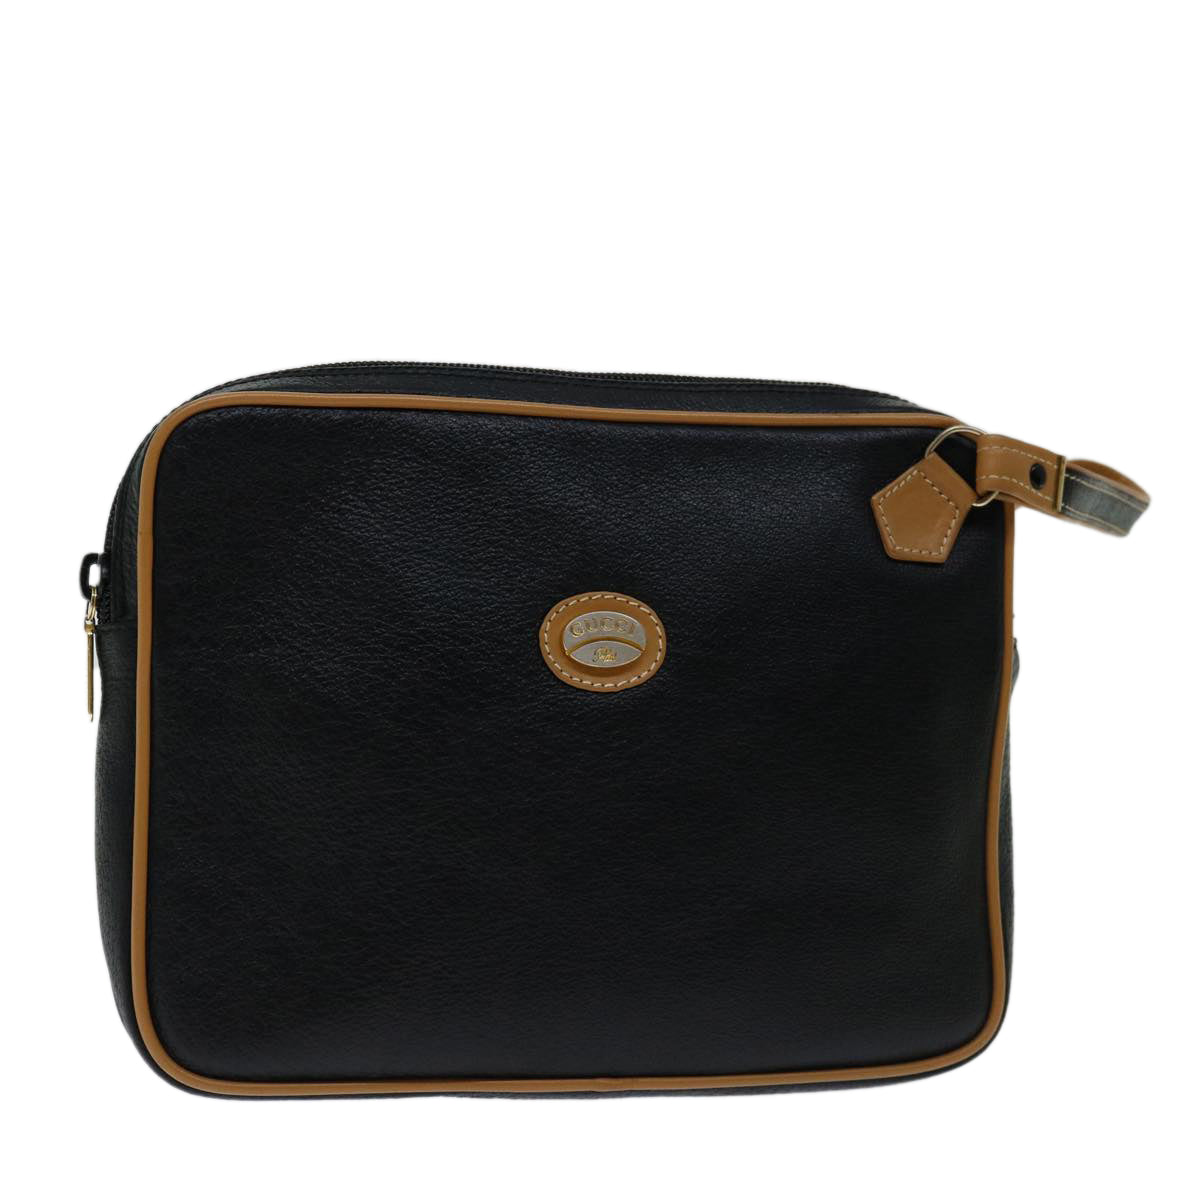 GUCCI Clutch Bag Leather Black Auth bs12738